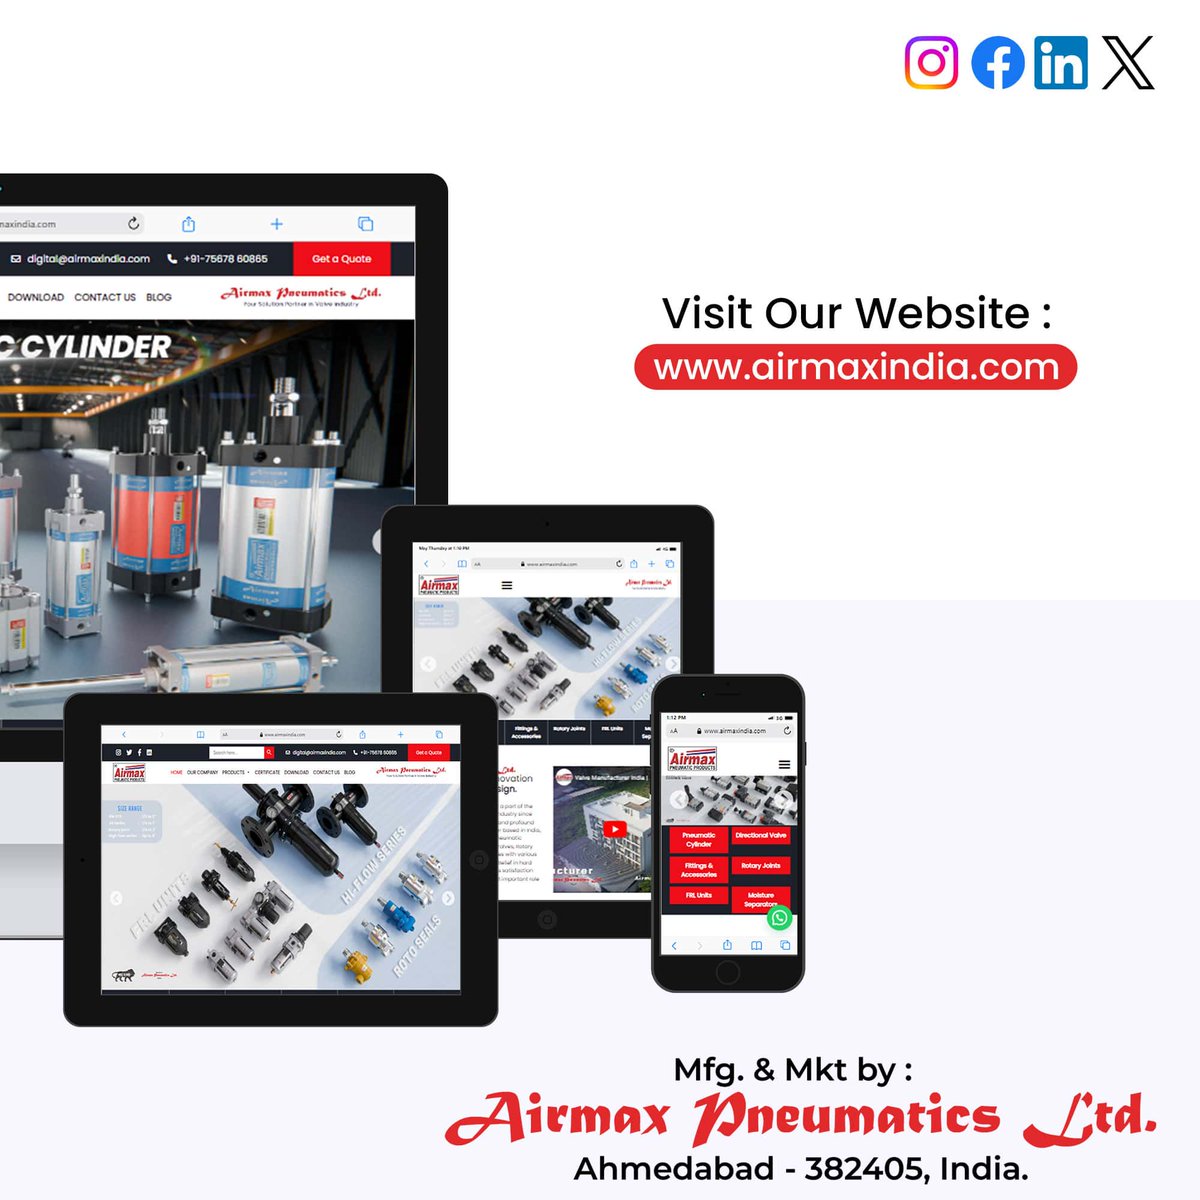 🚀 Exciting news alert: Our newly redesigned website has officially launched! 🎉 Come in and explore the fresh look and improved features!

#airmaxpneumatics #Website #Launch #FreshLook #RedesignedWebsite #Improved #Features #Explore #Site #Manufacturer #Exporter #Technology